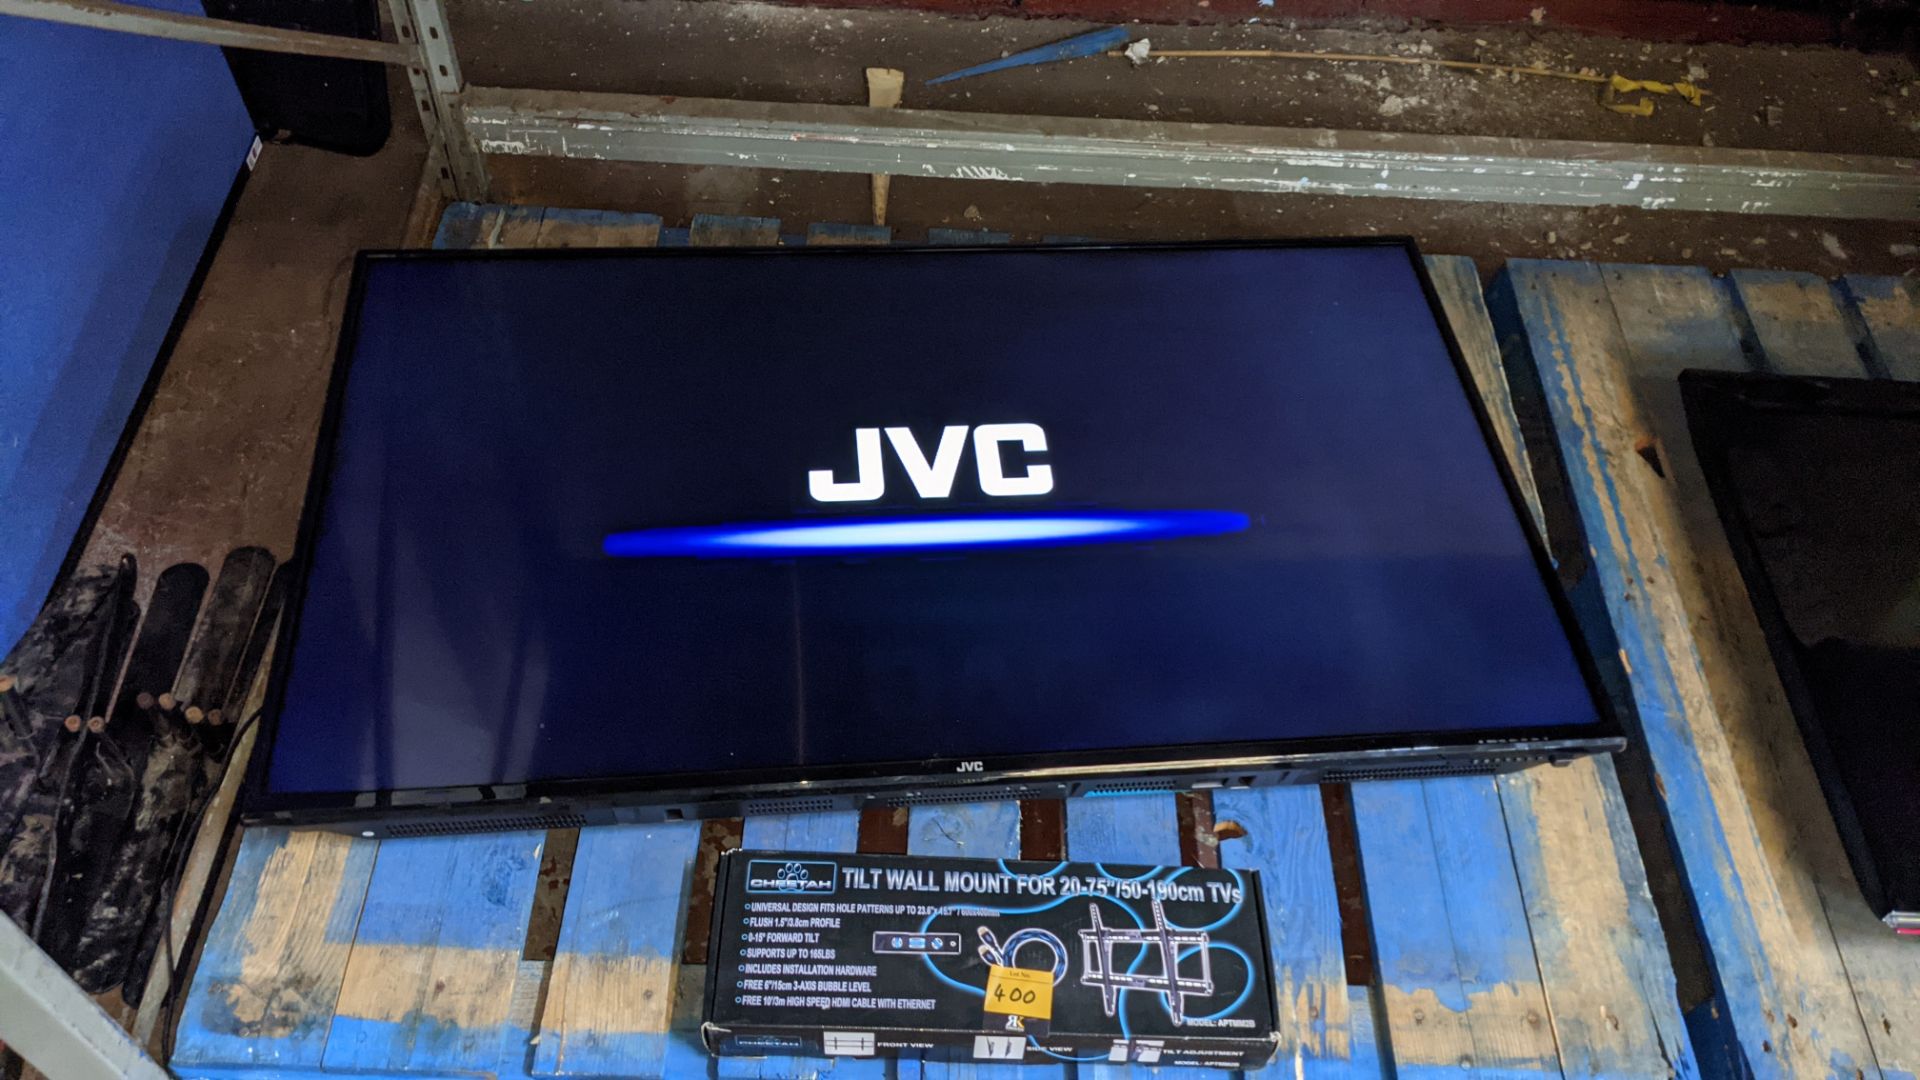 JVC 50" TV including wall-mount, model LT-50C550 - with Remote